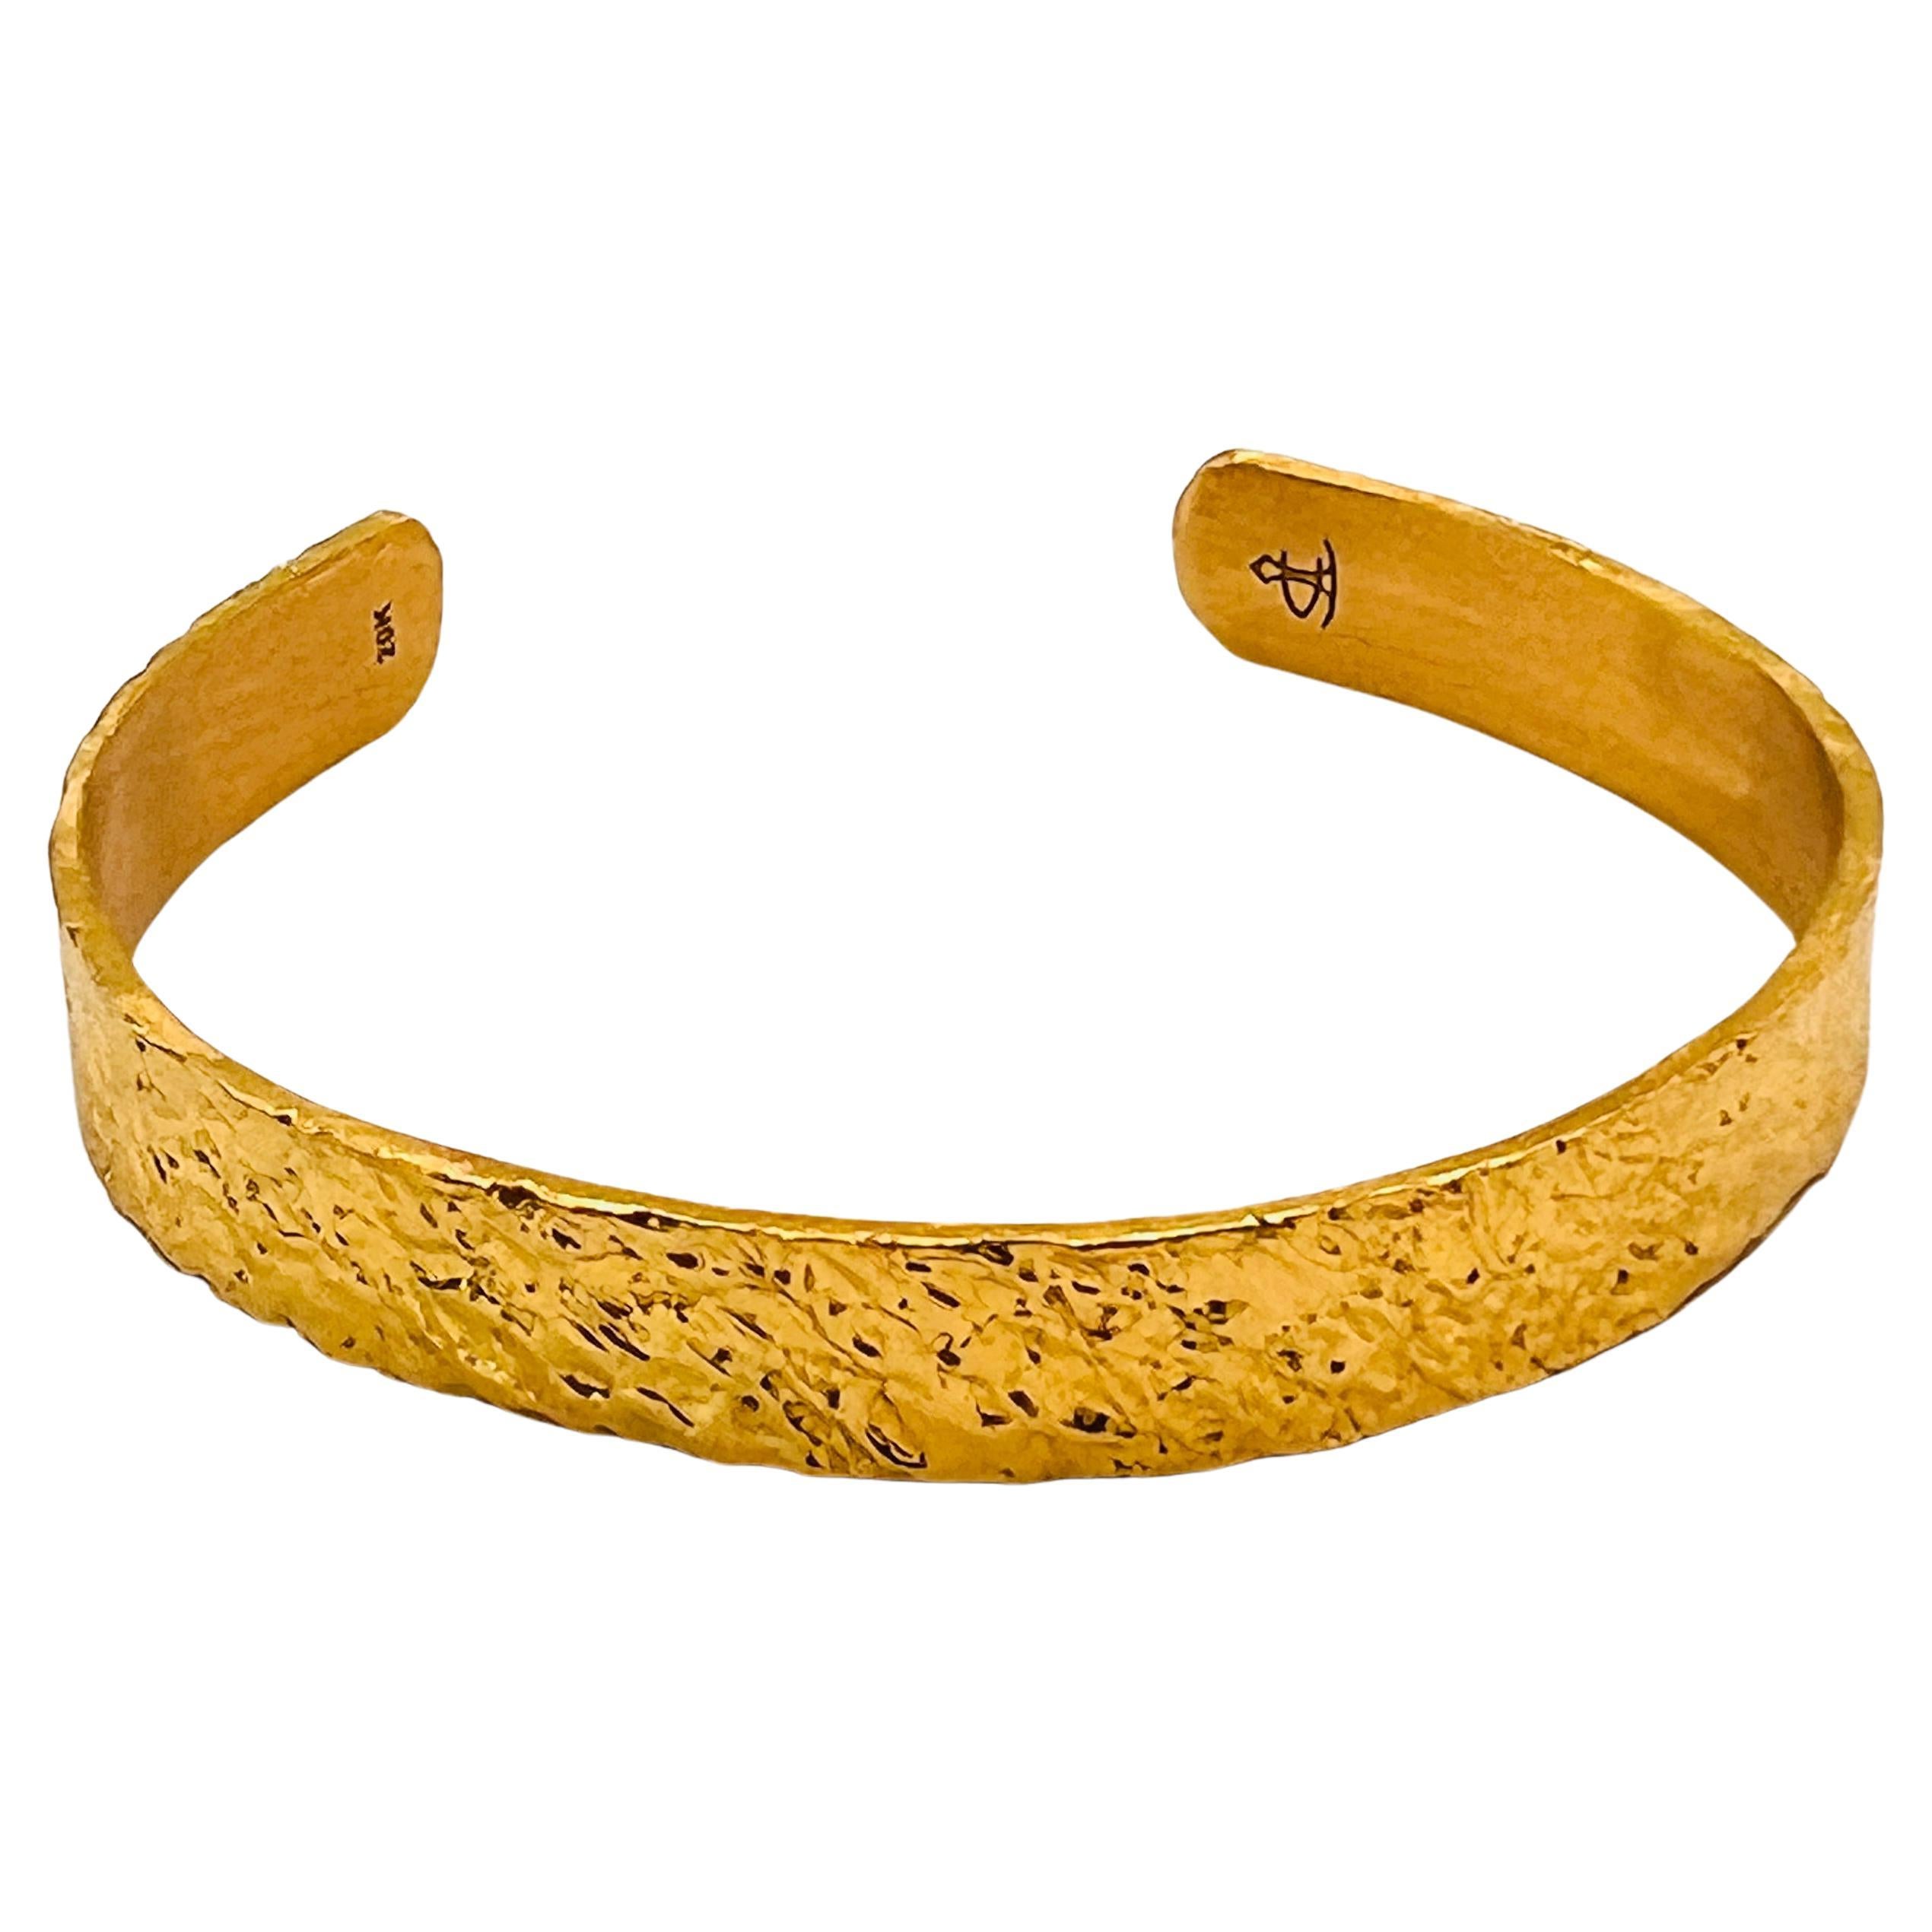 20k Gold Customized Engraved Cuff, by Tagili